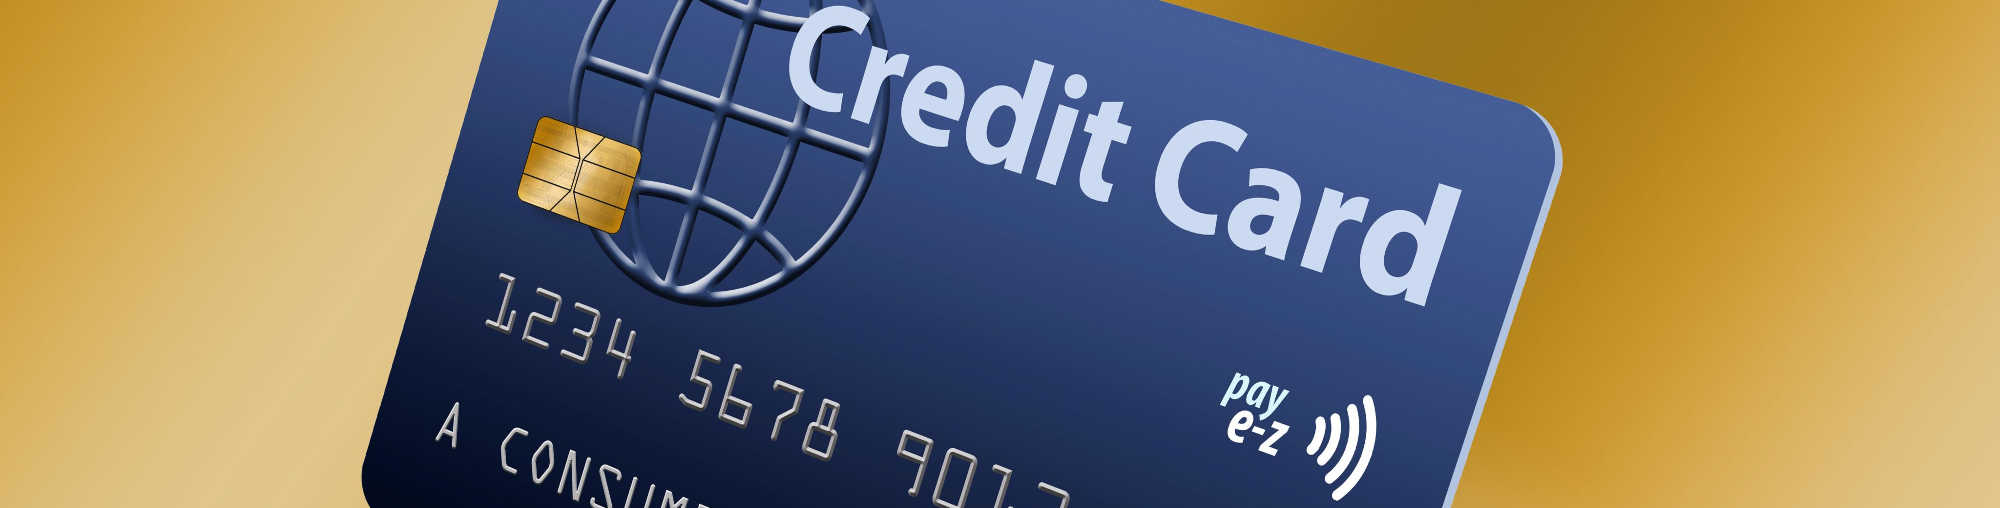 image of amslv credit card payment processing